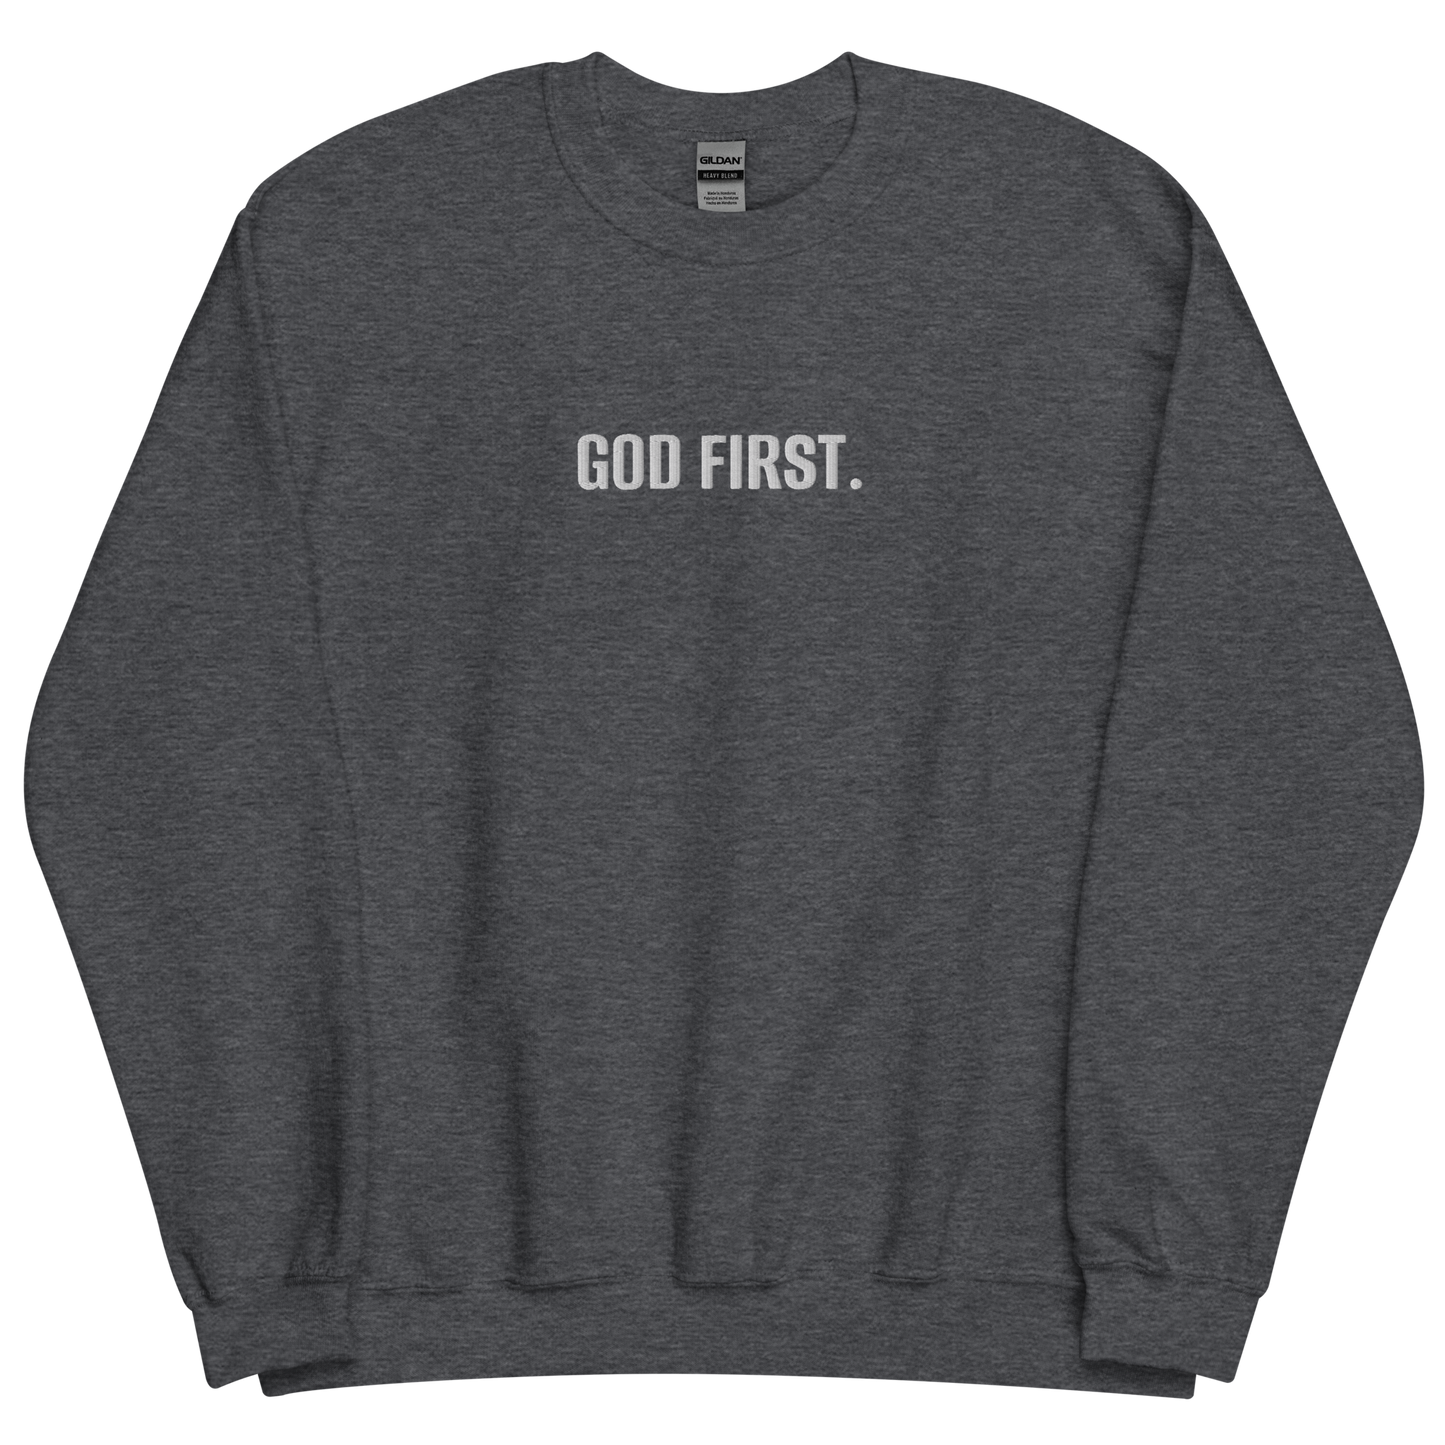 God First. sweatshirt with white embroidery